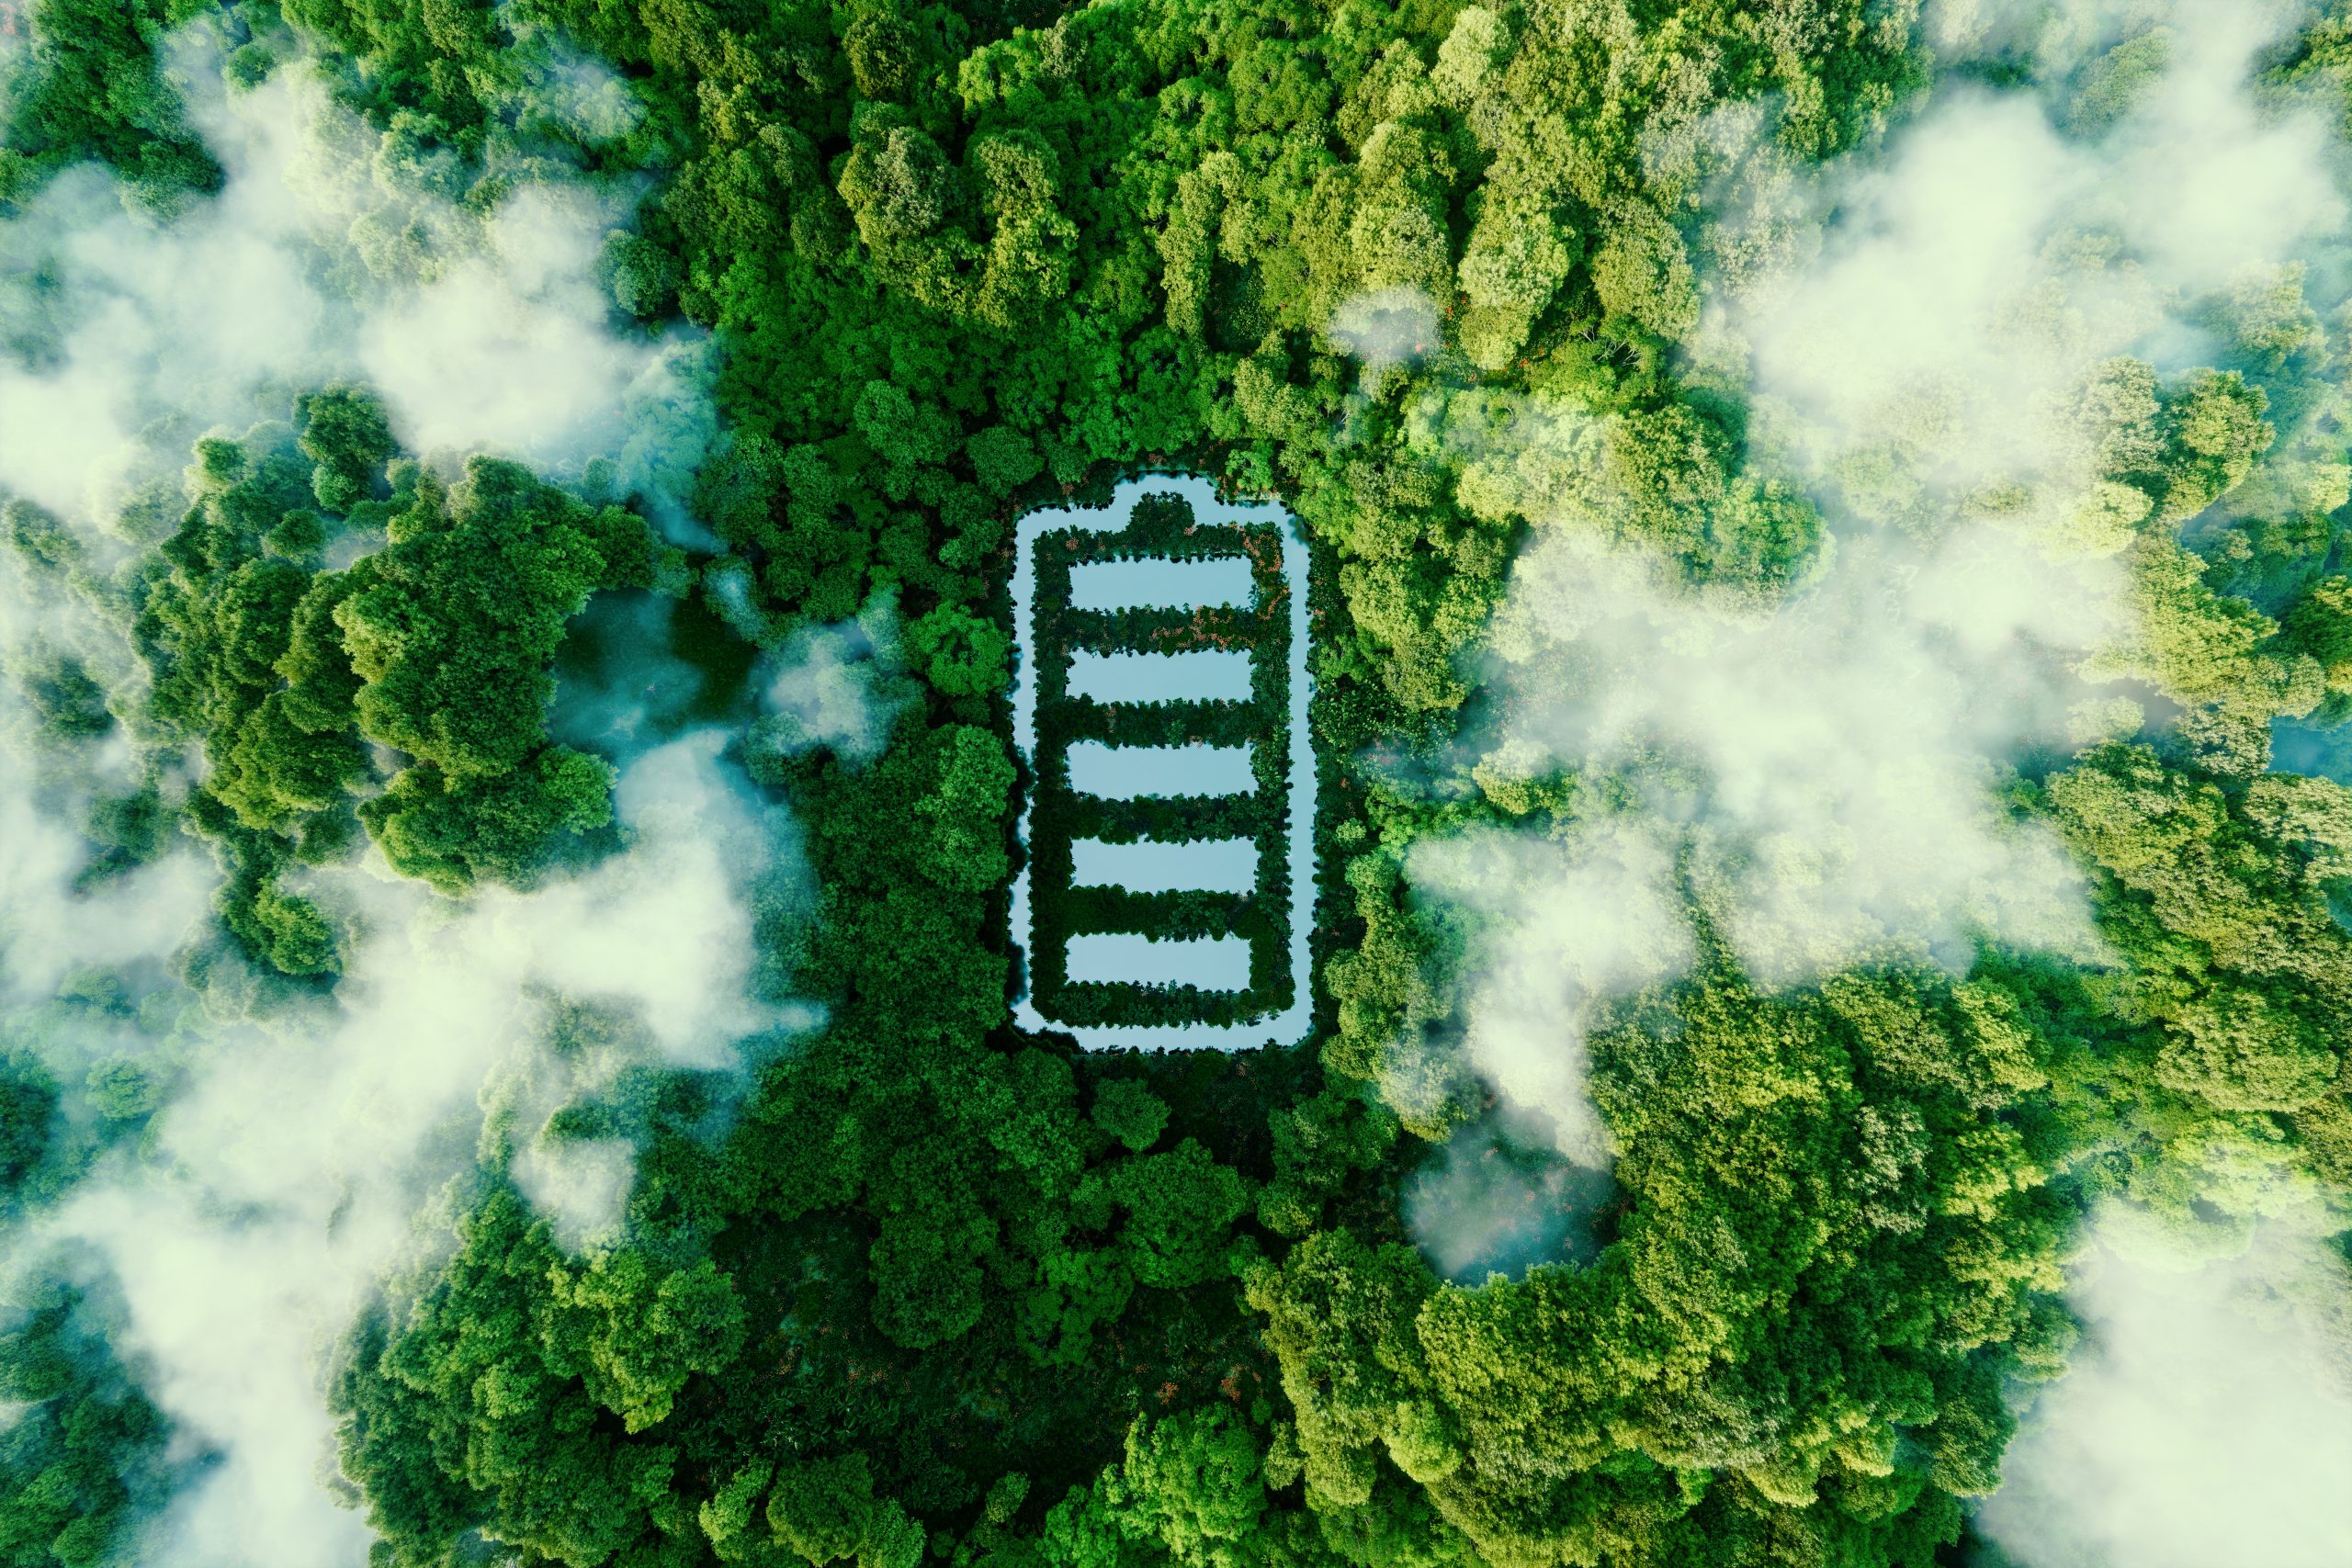 Overhead view of forest with a large white battery in the middle